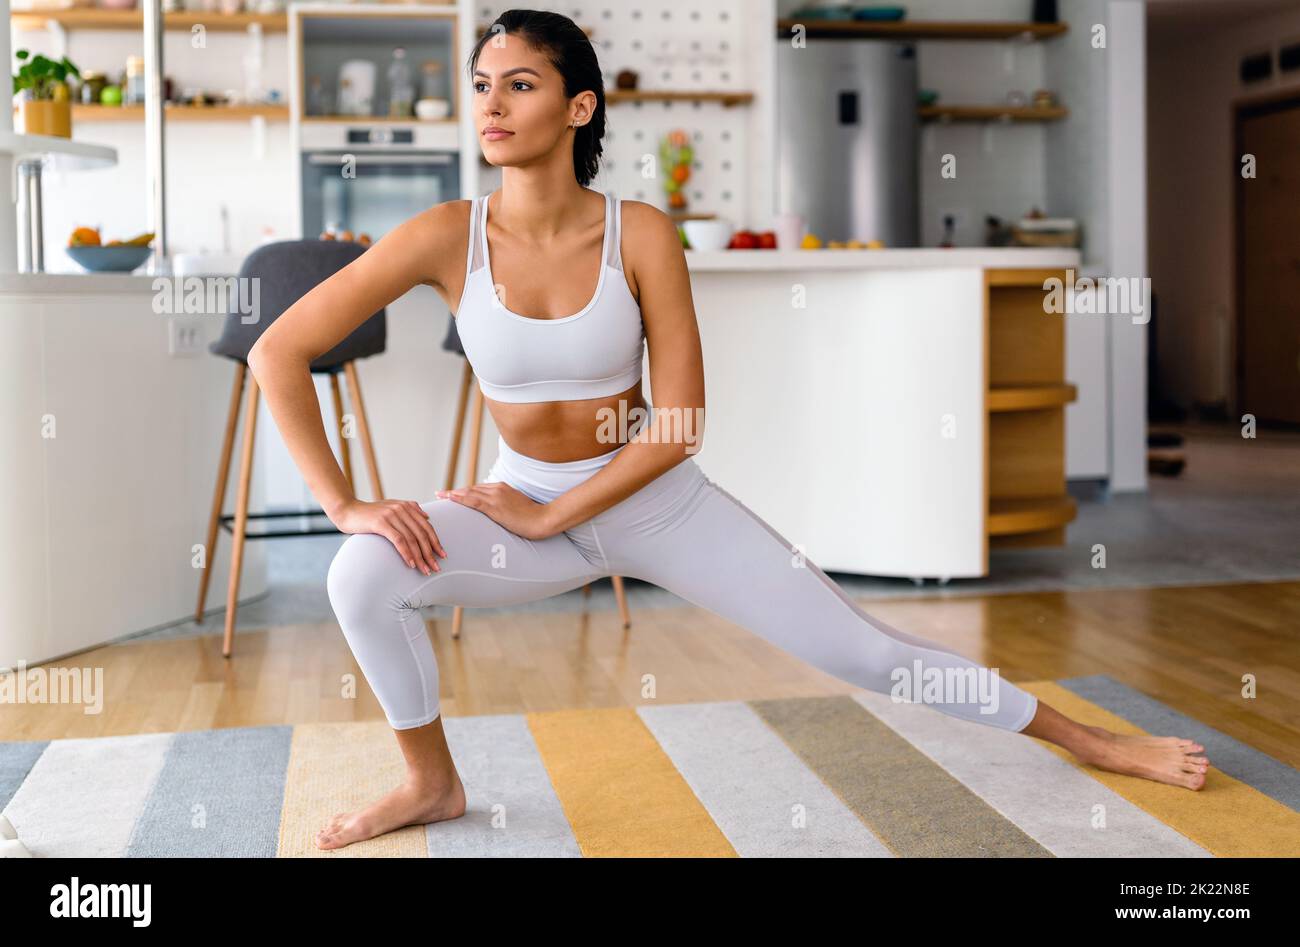 Fit sport woman exercising and training at home Stock Photo